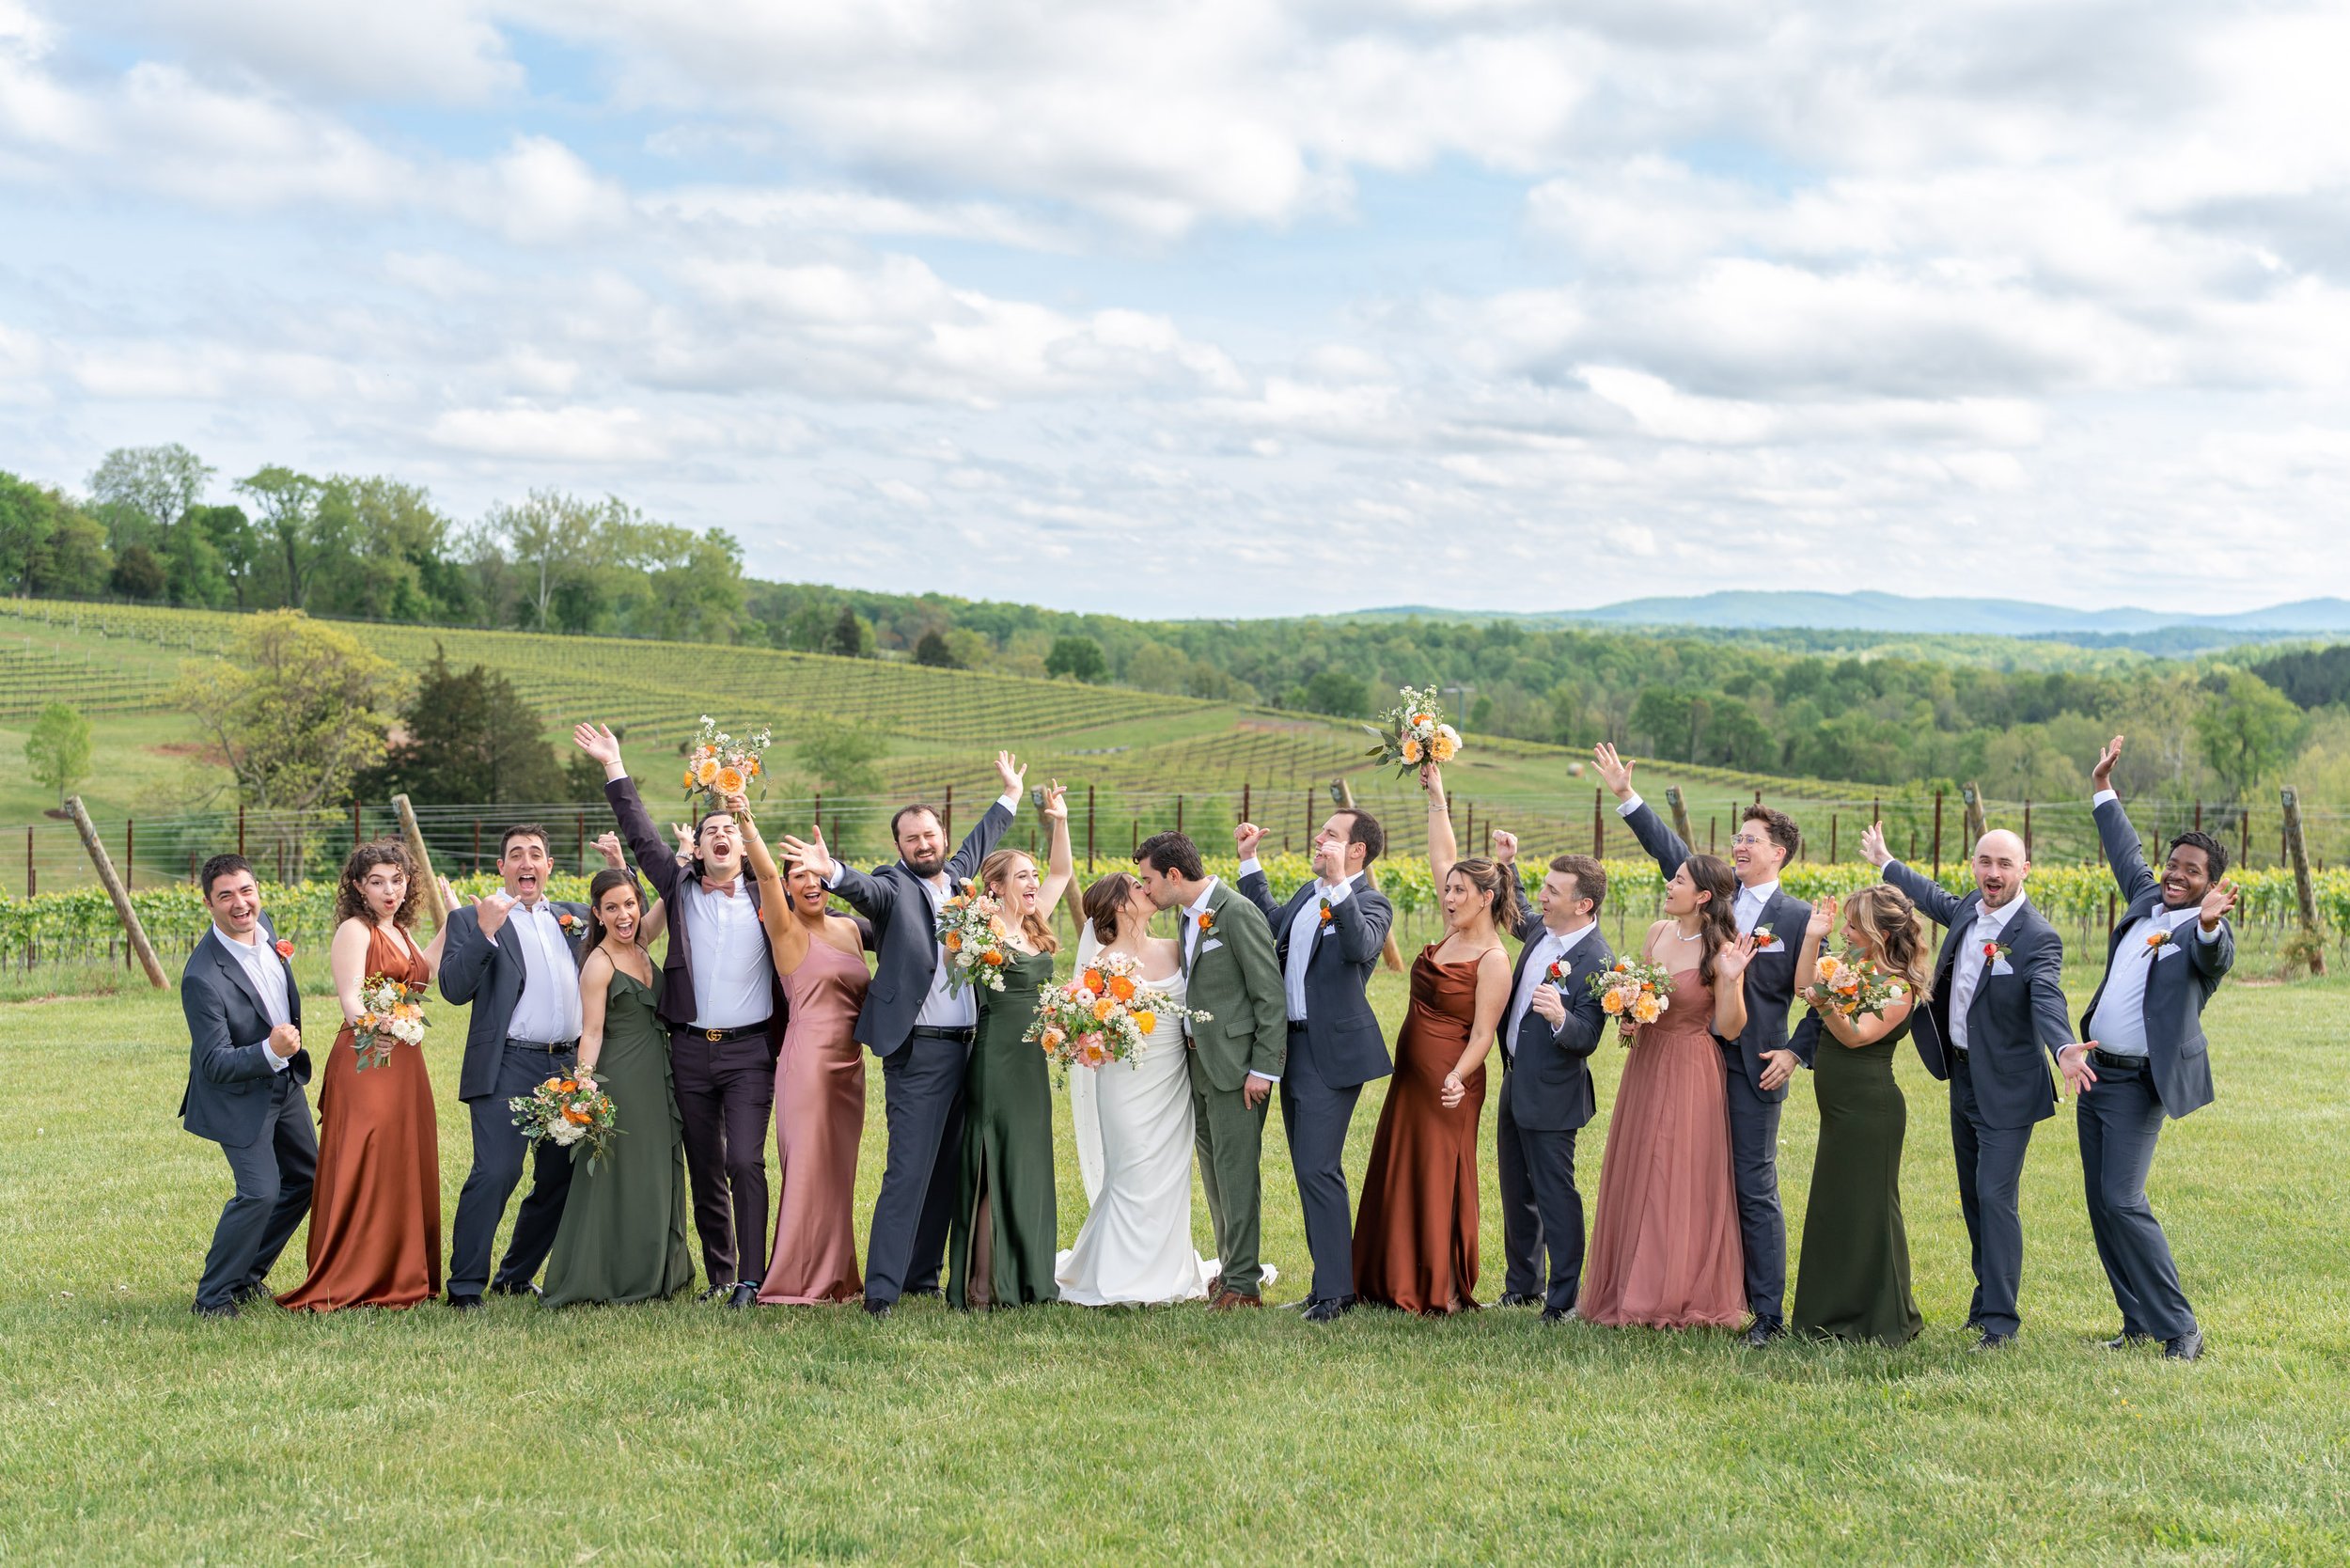 Bridal party celebrating photo at Stone Tower Winery on hillside